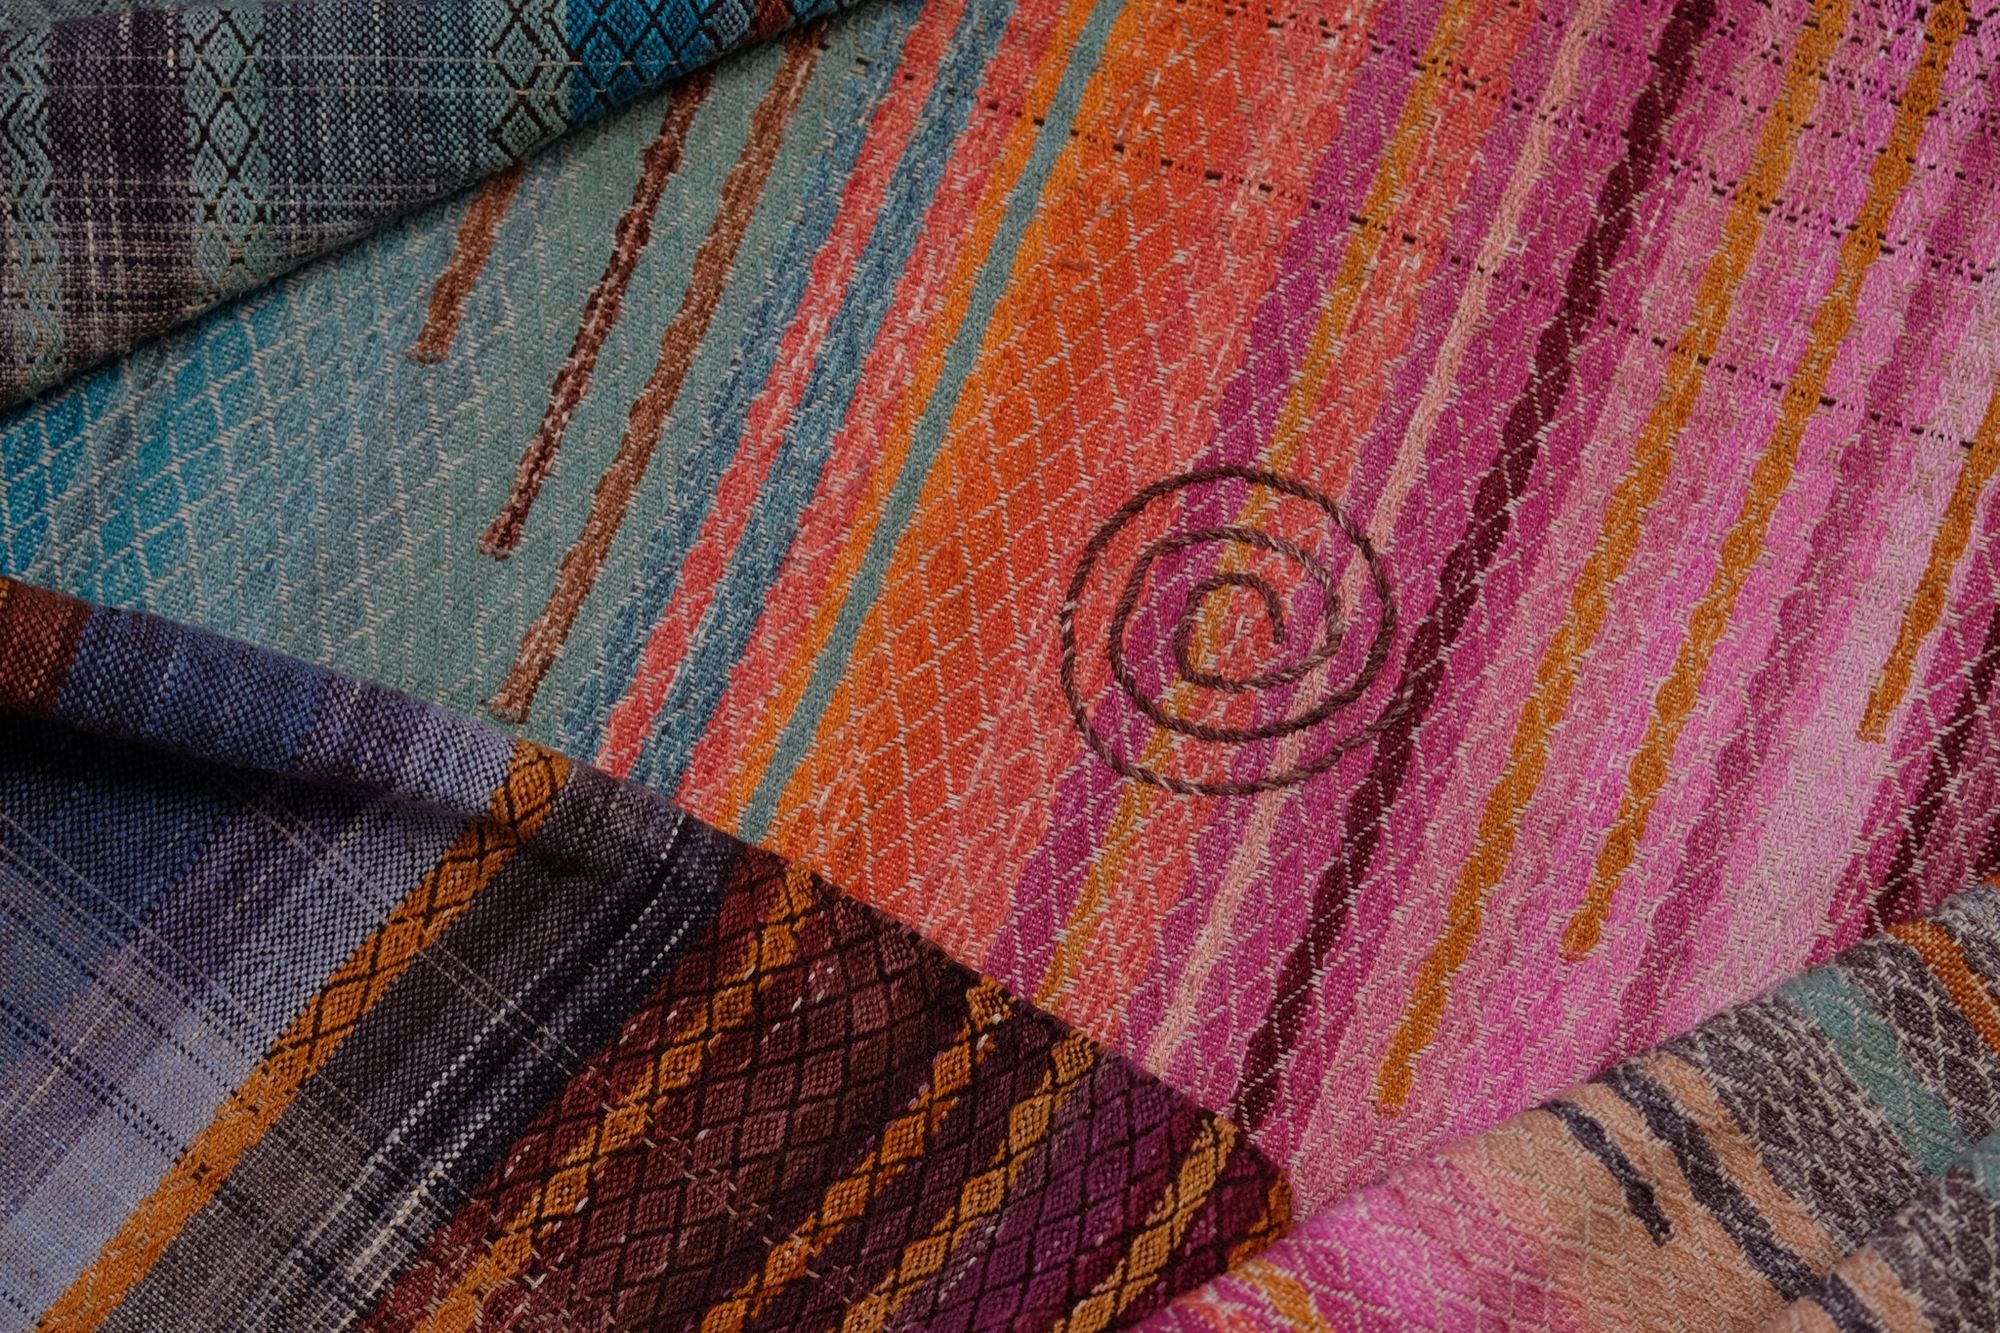 A detailed image of a brightly colored piece of handwoven fabric laying on a wood floor. It is in all shades of sunset pink, orange and gold, as well as blue and green. it has a spiral and crescent moon design on it as well